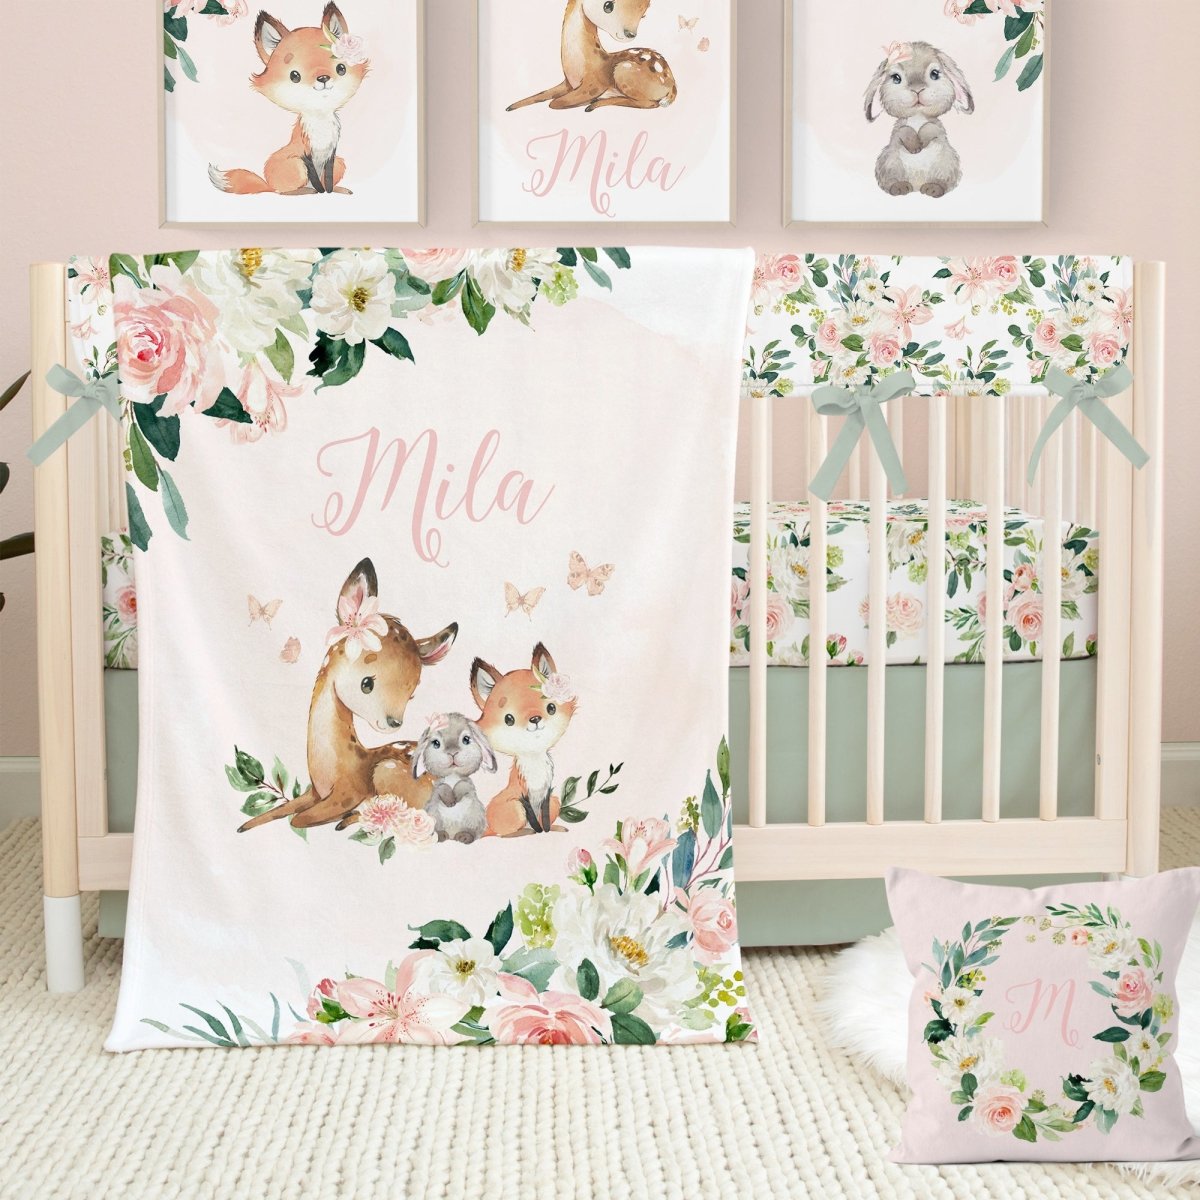 Woodland Meadows Personalized Minky Blanket - gender_girl, Personalized_Yes, text